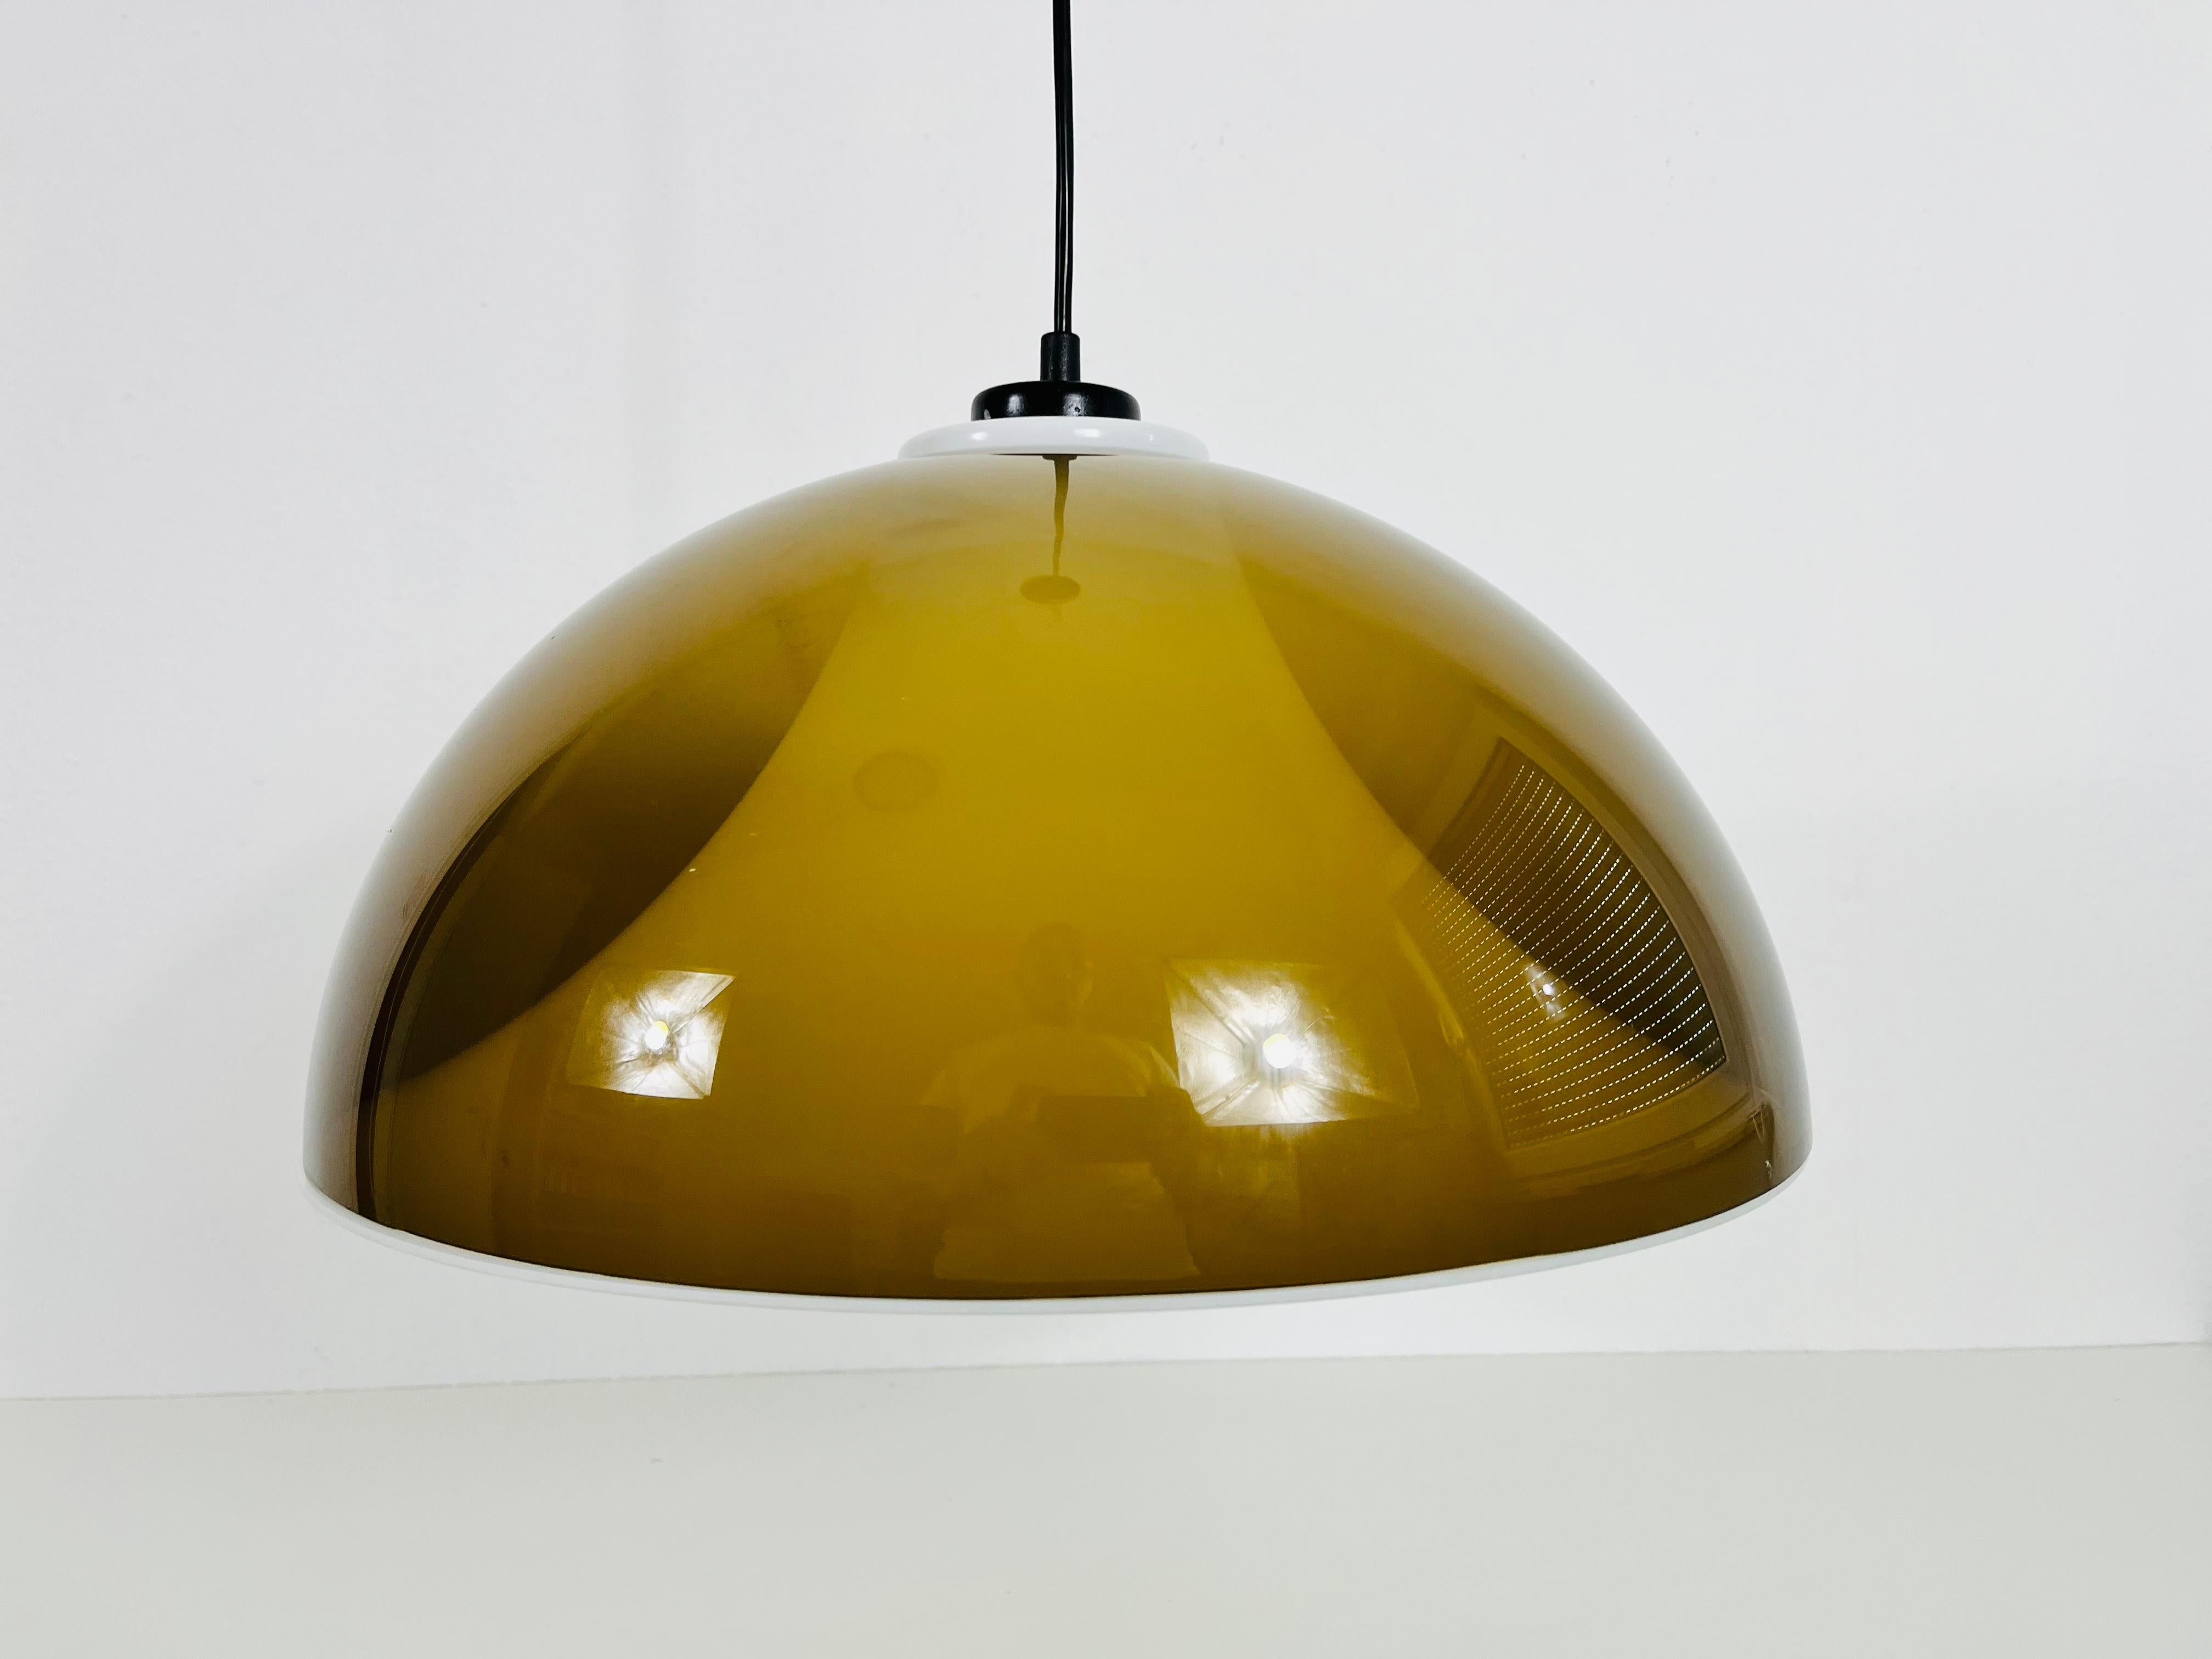 Vintage pendant lamp by Temde in the 1970s. It is made from acrylic glass and plastic.

Measures: height 23-90 cm

Diameter 45 cm 

The light requires one E27 light bulb. Works with both 120/220V. Good vintage condition.

Free worldwide